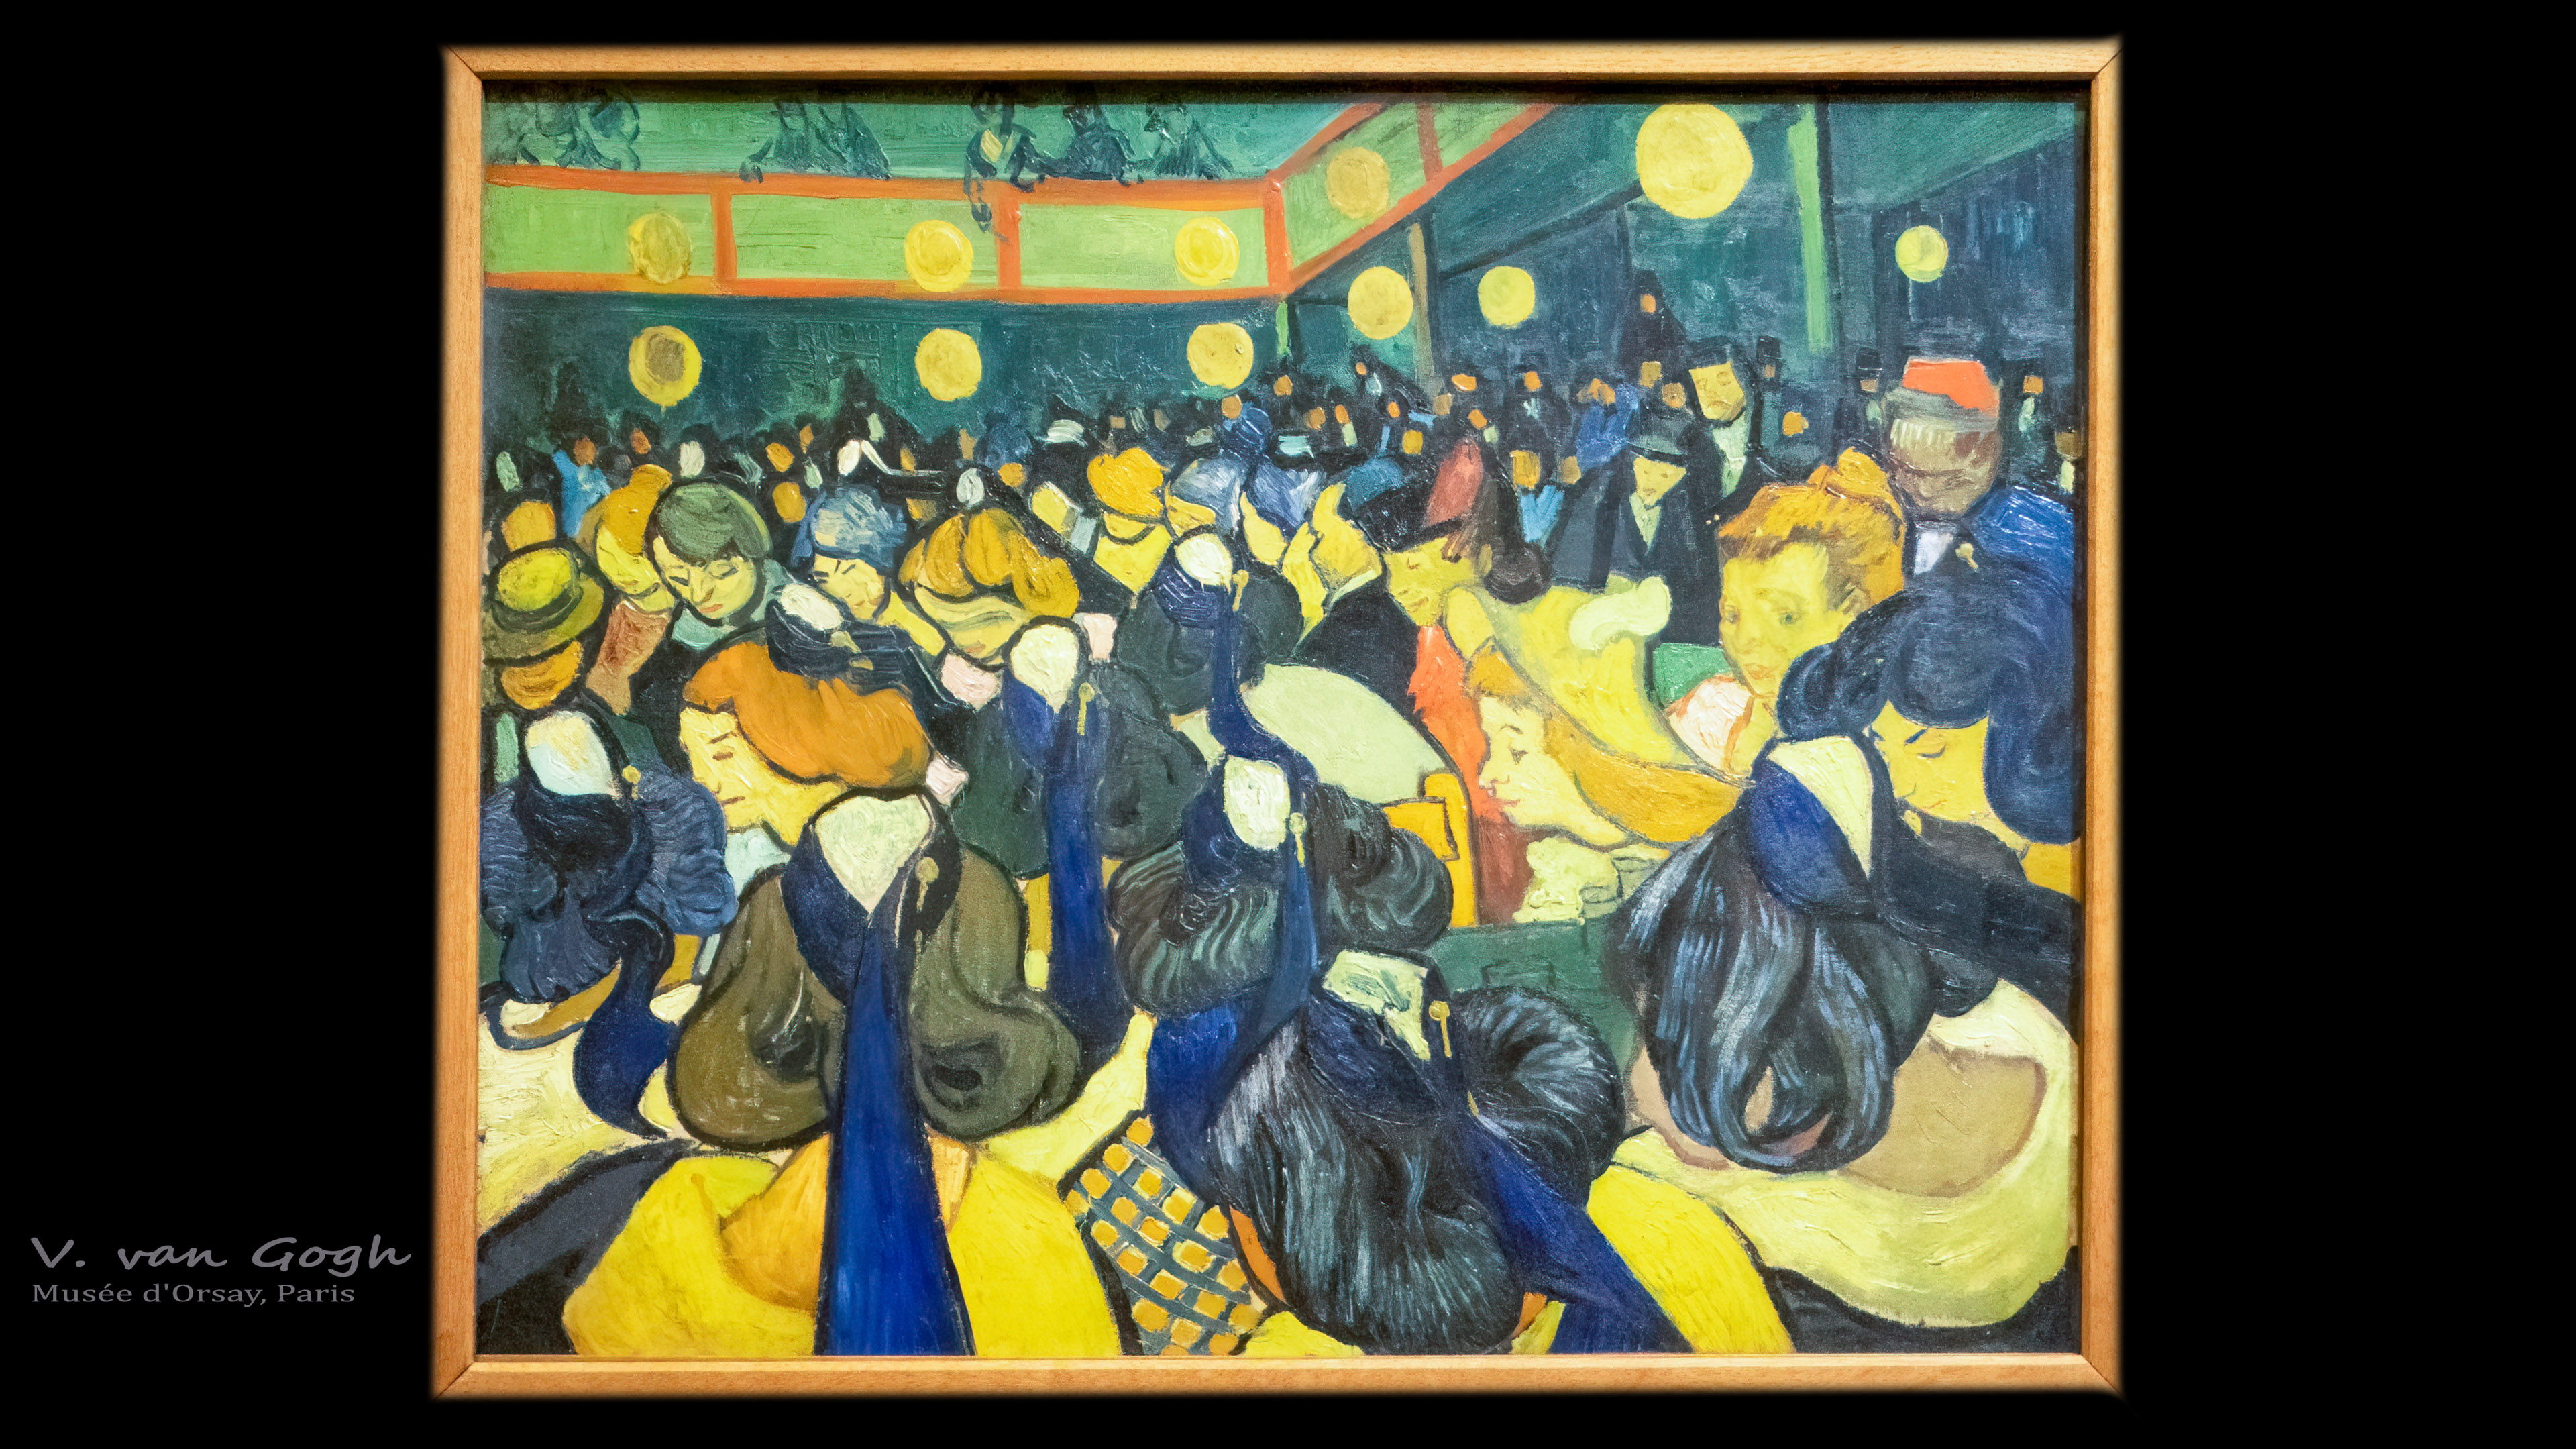 Download the The Dance Hall in Arles wallpaper for PC and join the festive atmosphere of Van Gogh’s painting with a lively scene of people dancing and socializing in a café, with bright colors and dynamic strokes.